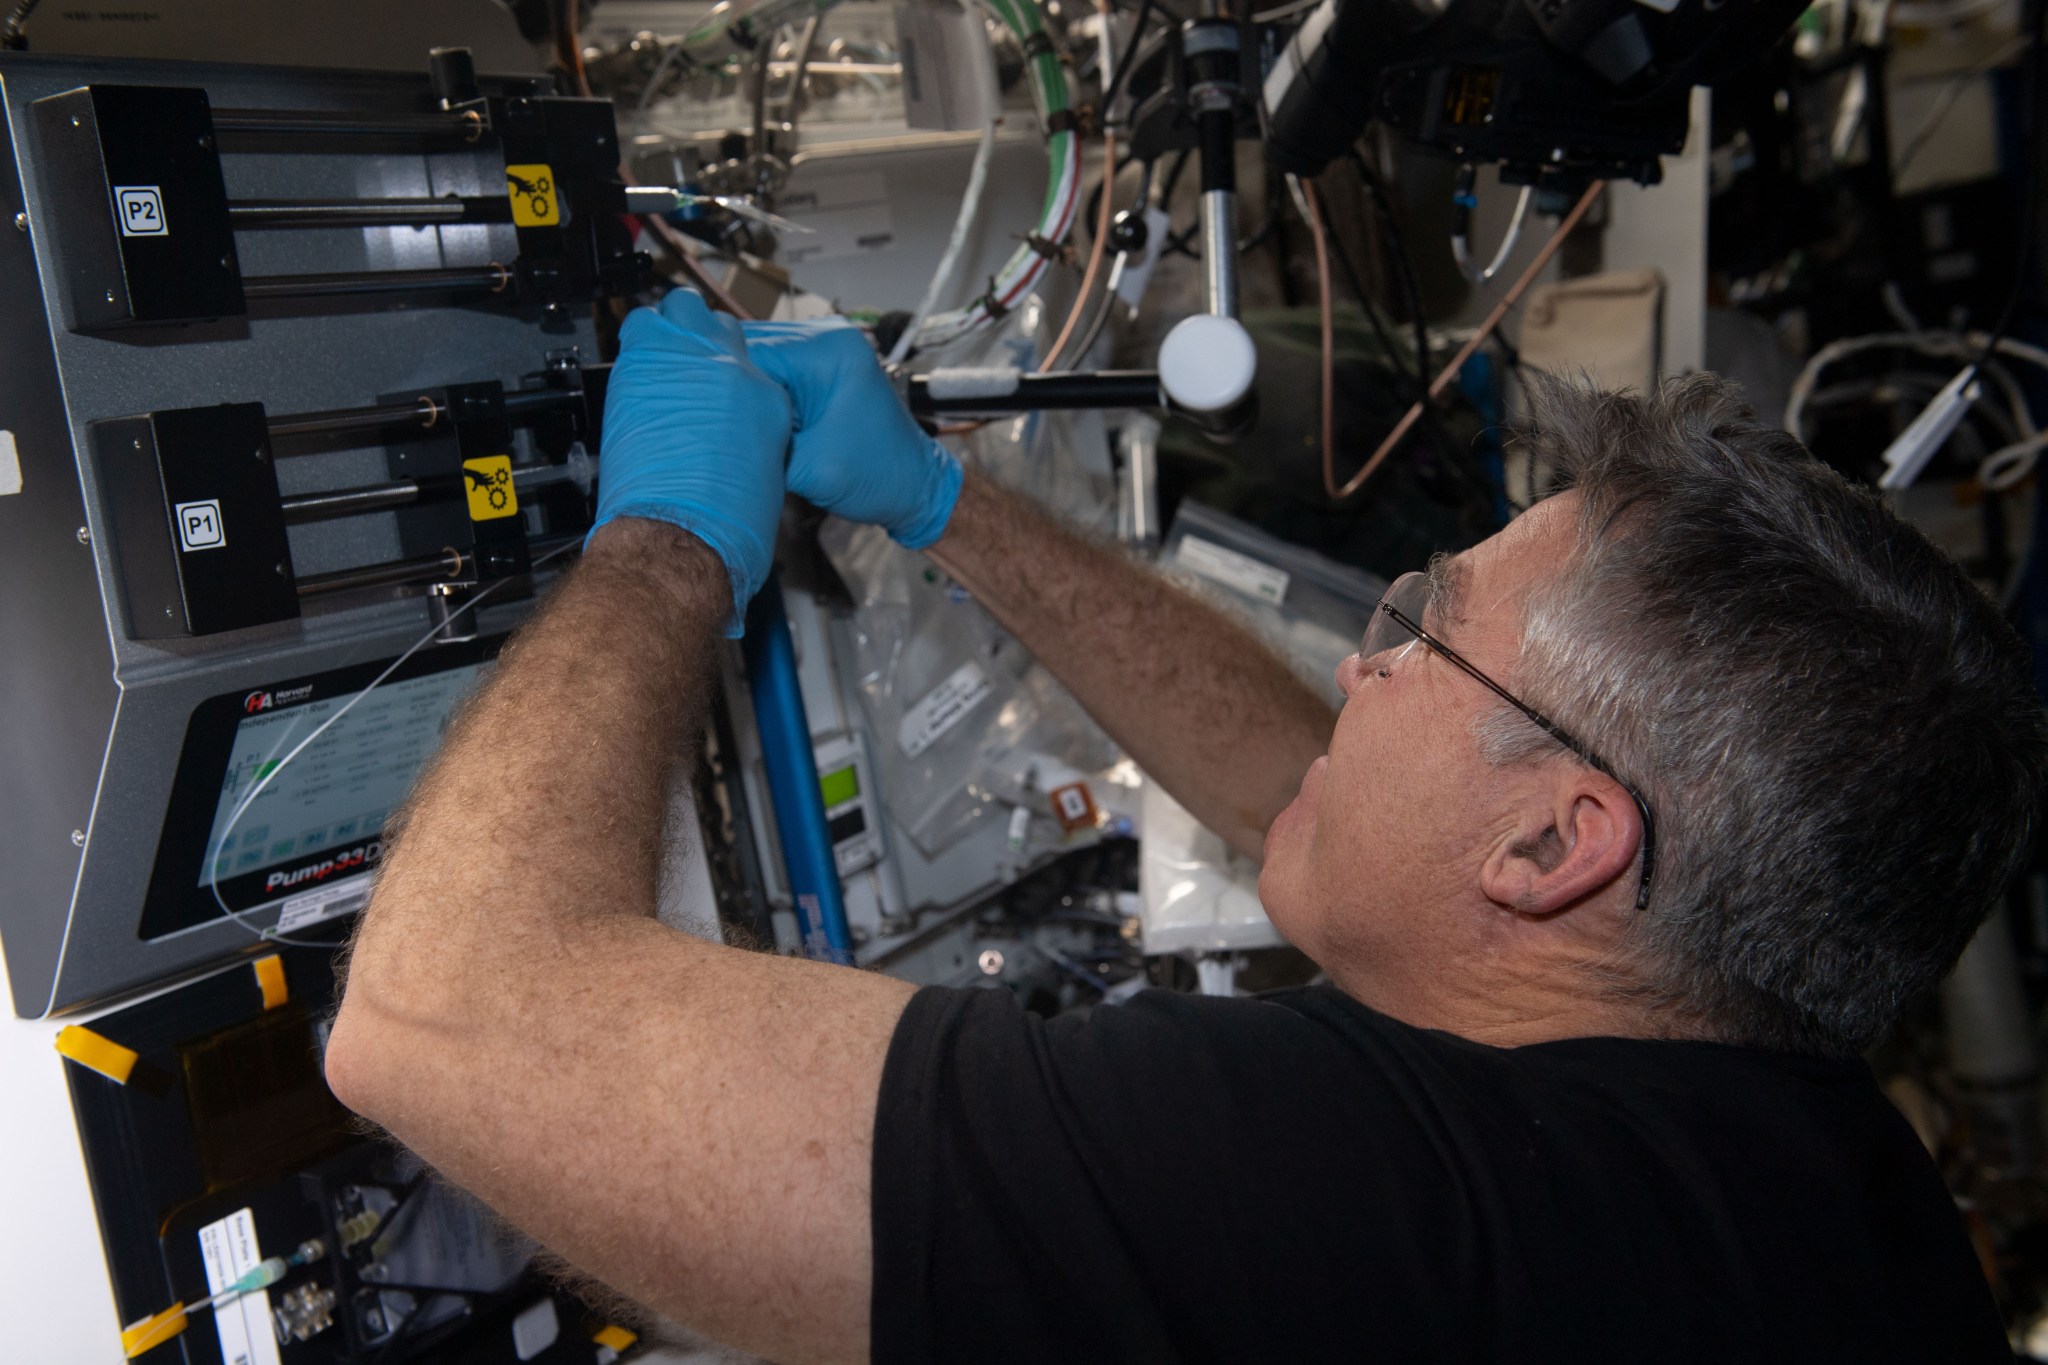 NASA astronaut Stephen Bowen conducts operations for Foams and Emulsions, an experiment that observes the dispersion of bubbles and droplets in liquids.